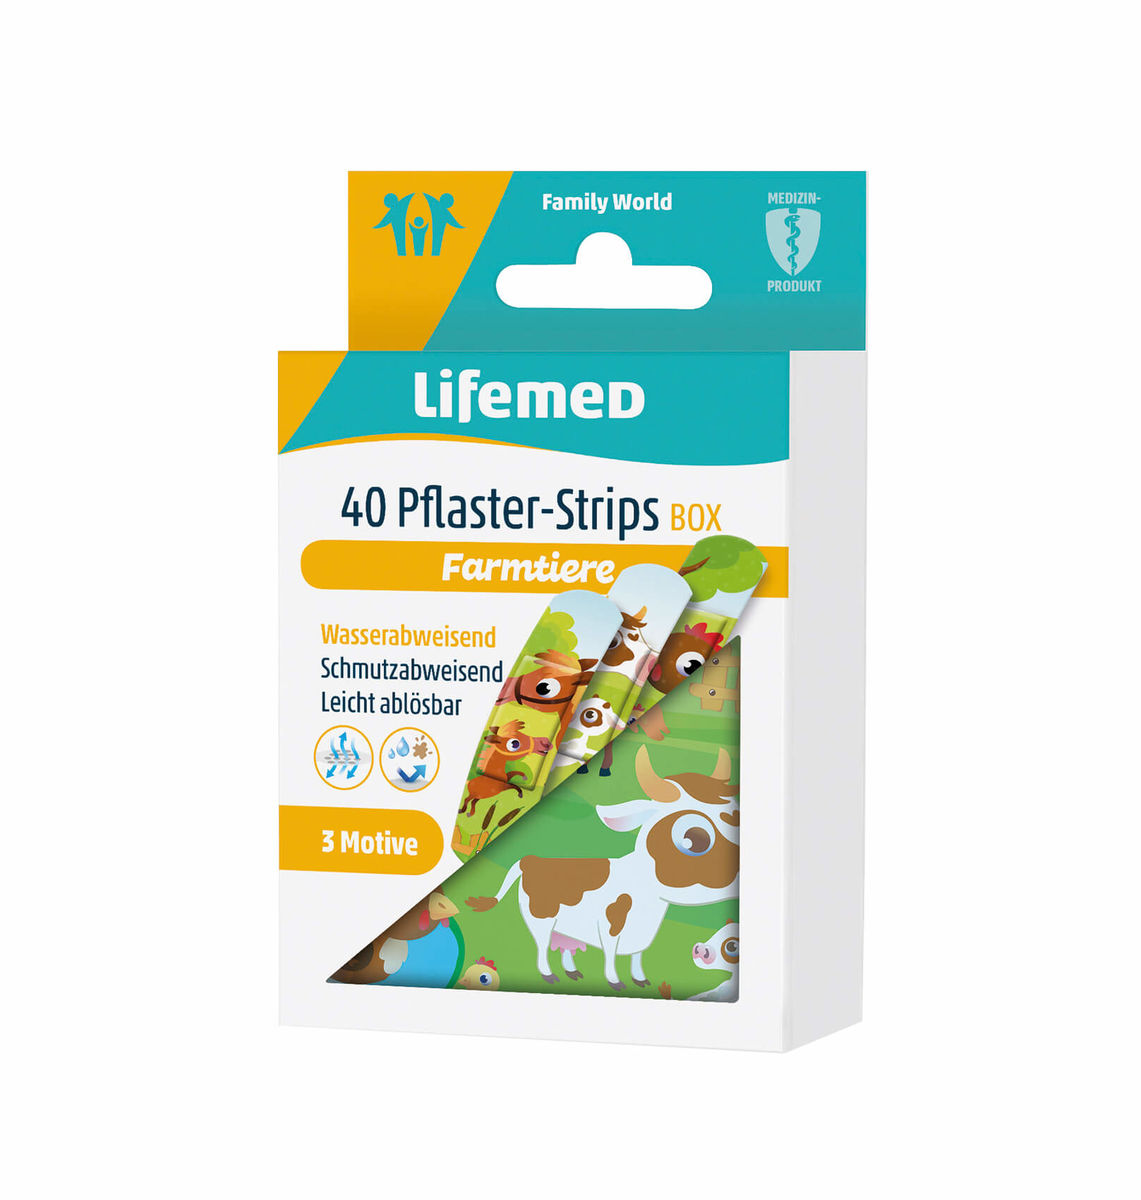 Image of Lifemed 40 Pflaster-Strips Box 6,0 cm x 1,7 cm, Farmtiere bei nettoshop.ch